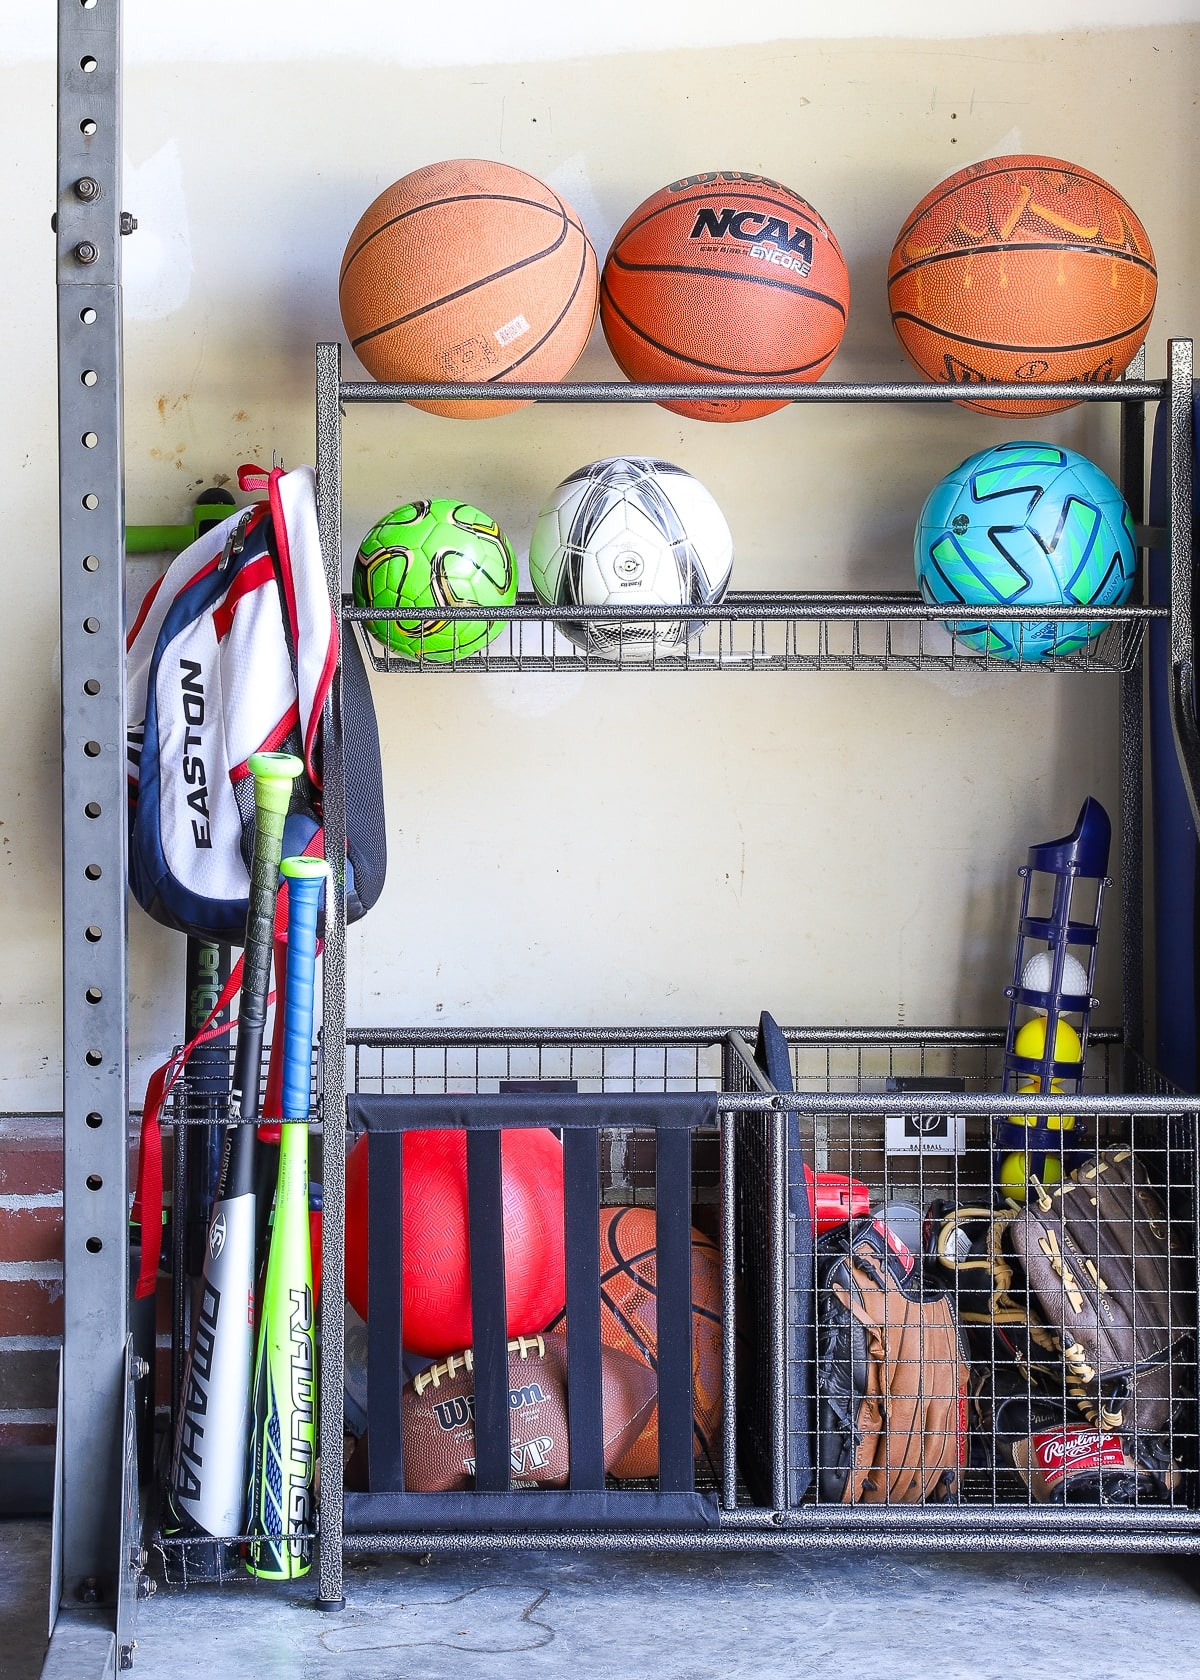 Best Garage Organization Products - Life with Less Mess